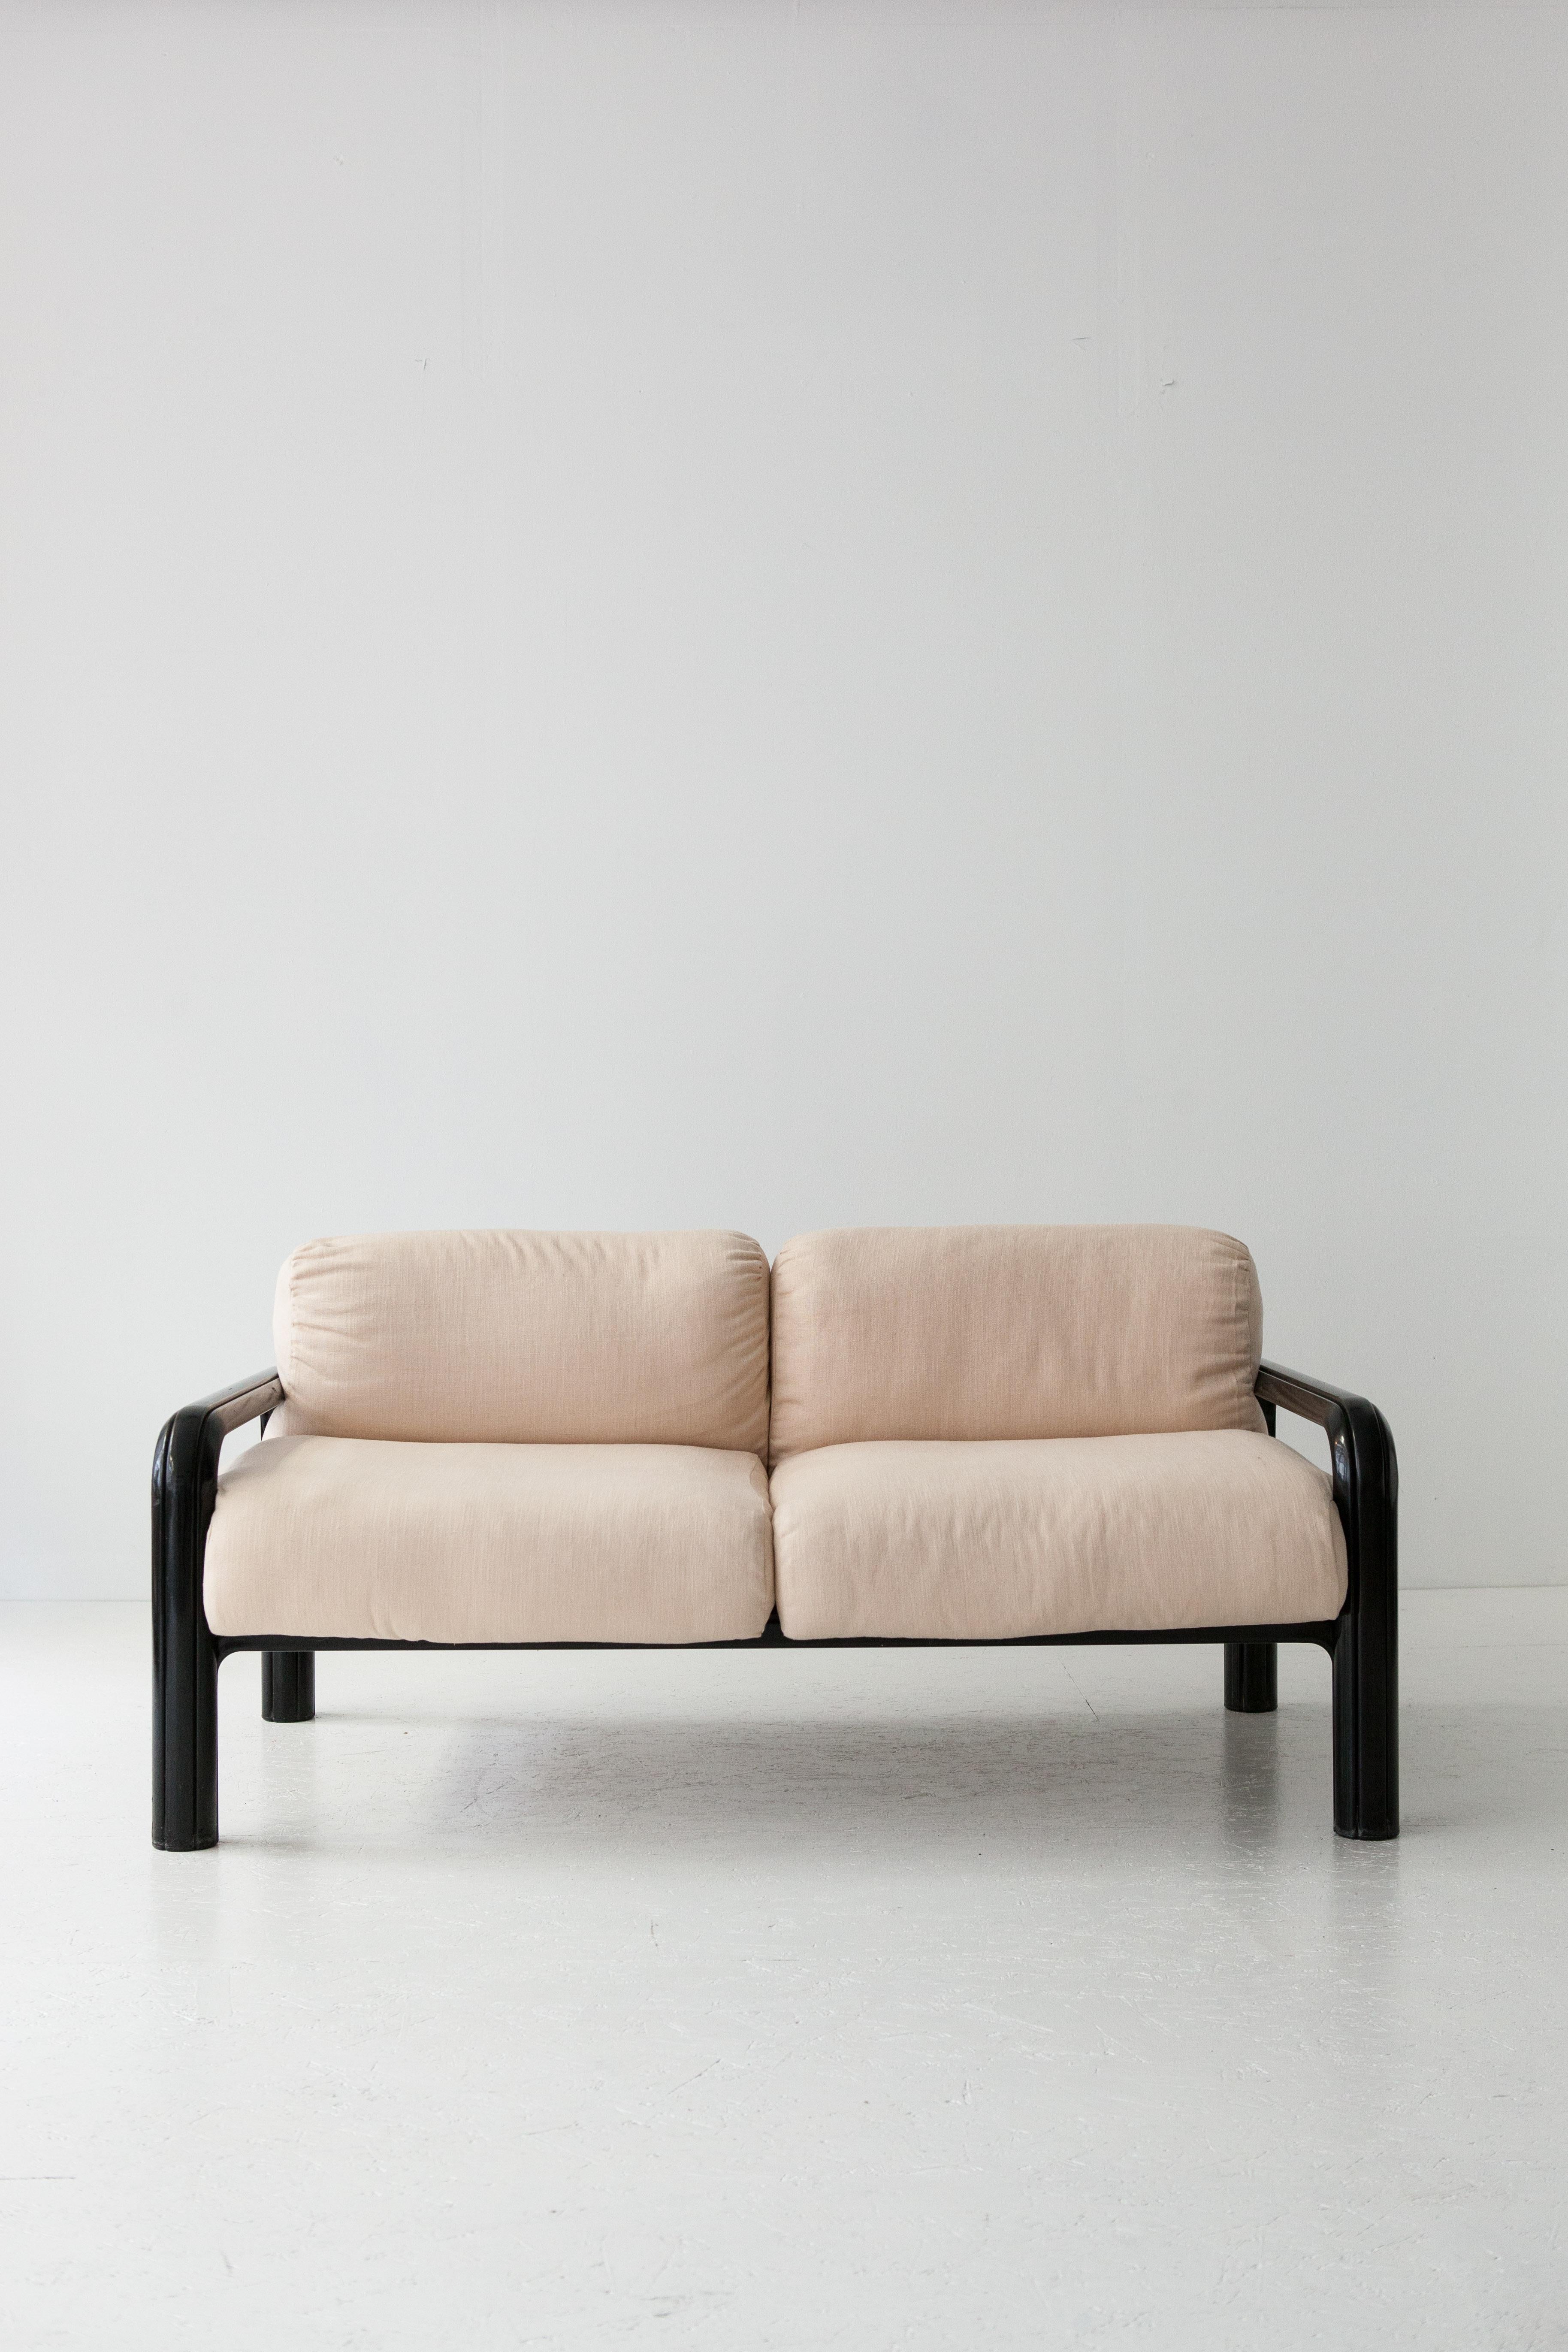 Gae Aulenti's loveseat, introduced by Knoll International in 1976, exemplifies the minimalist aesthetic and functionalist principles of late 20th-century design. Its clean lines, premium materials, and ergonomic design challenge traditional norms,